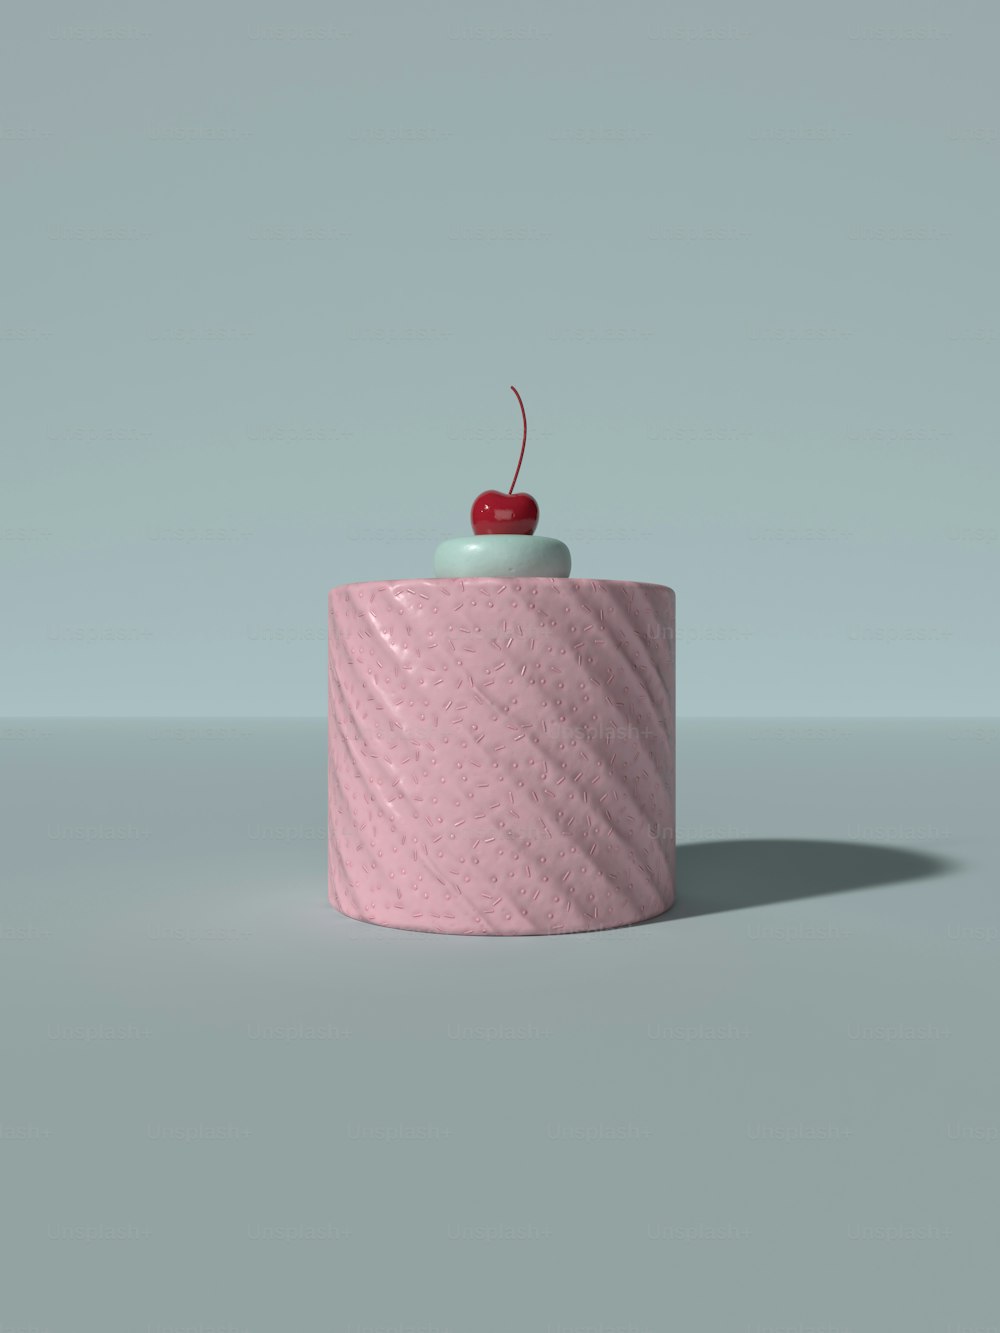 a pink object with a cherry on top of it